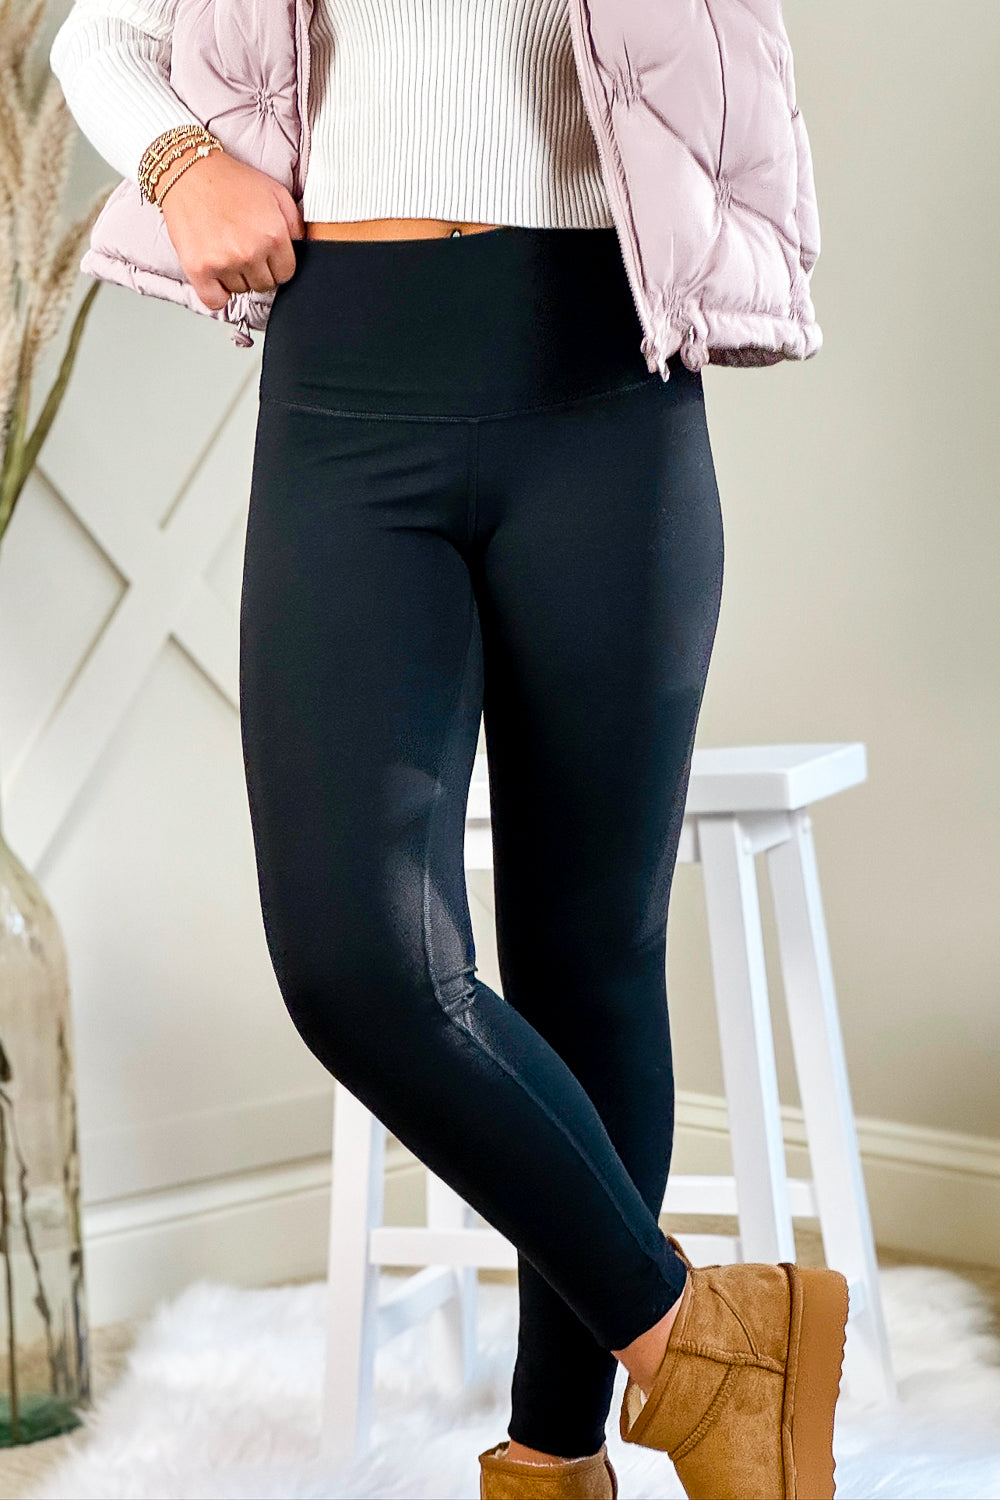 Aerie chill play move brown high rise leggings size small - $29